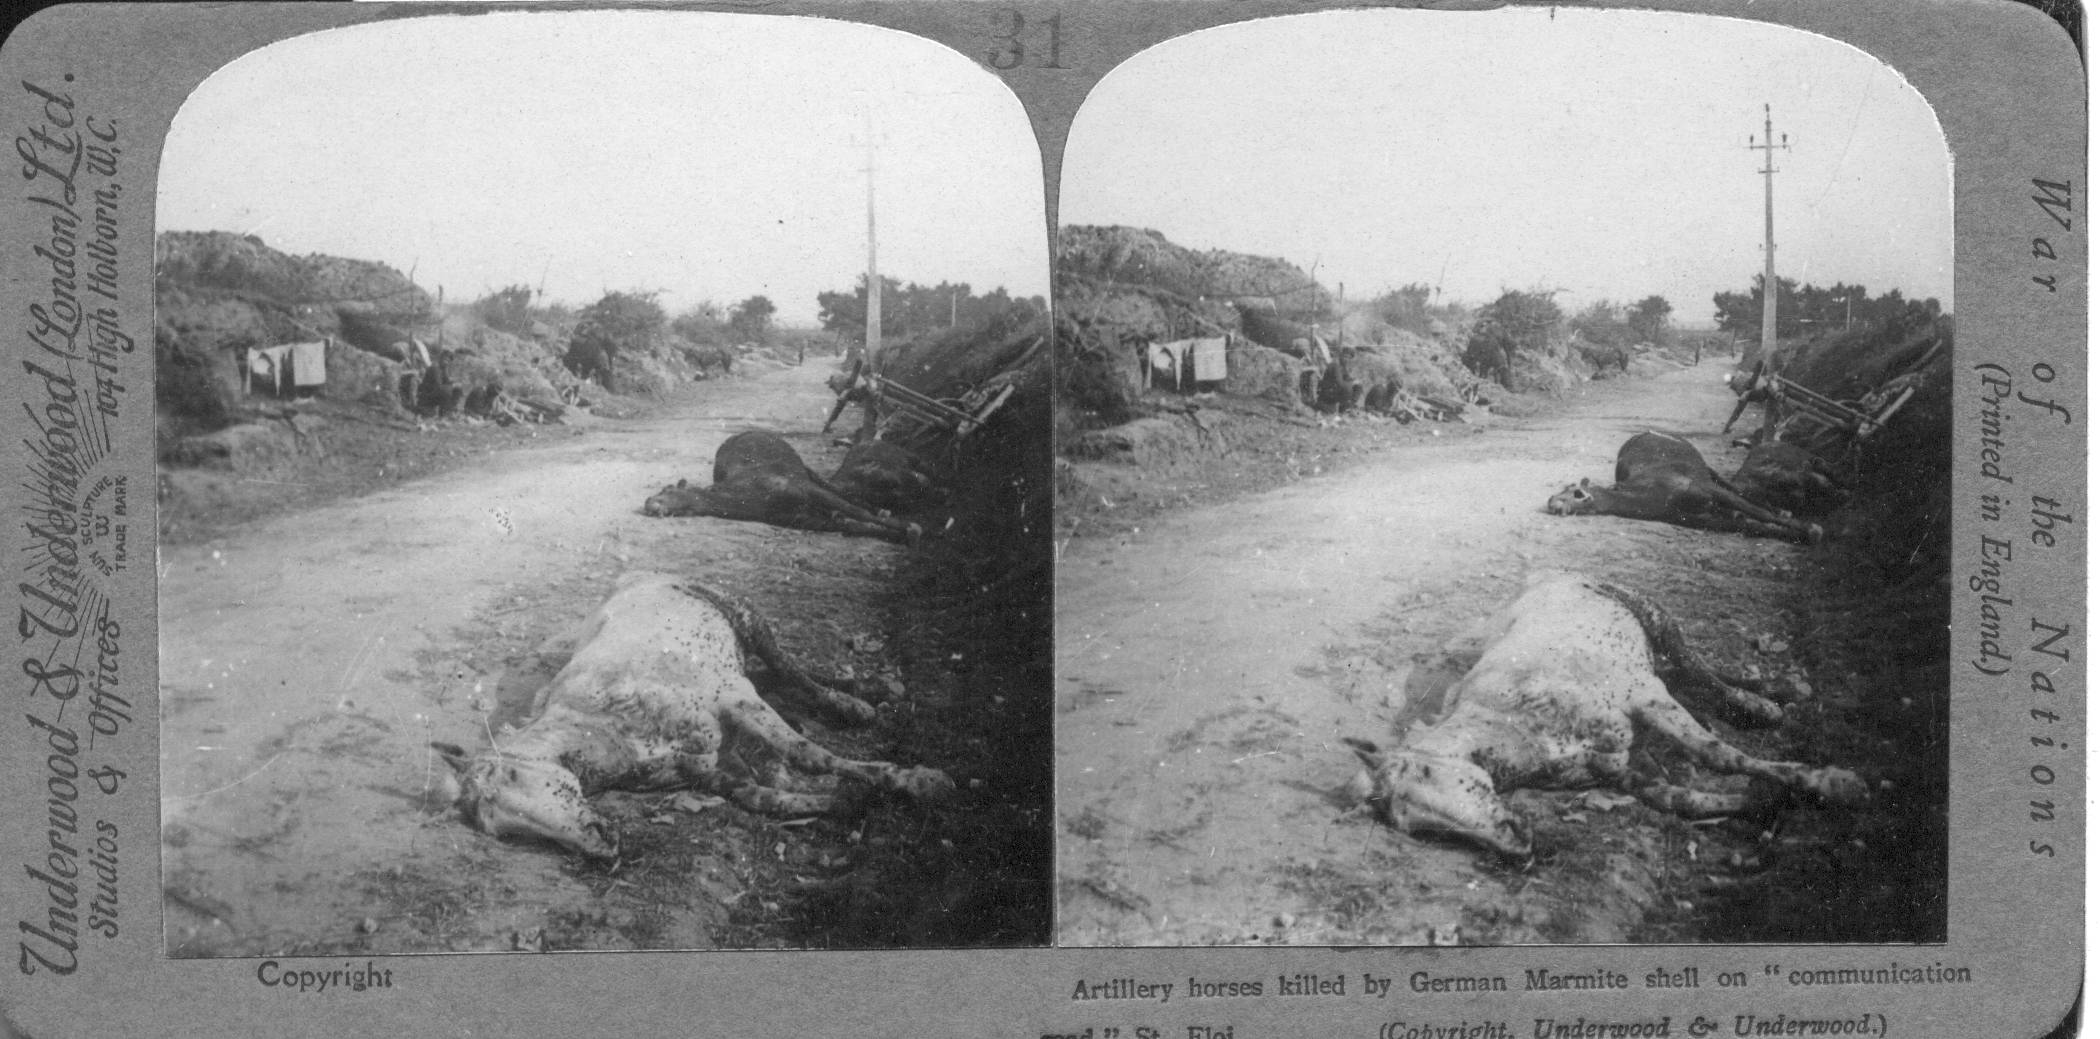 Artillery horses killed by German Marmite shell on "communications road," St. Eloi